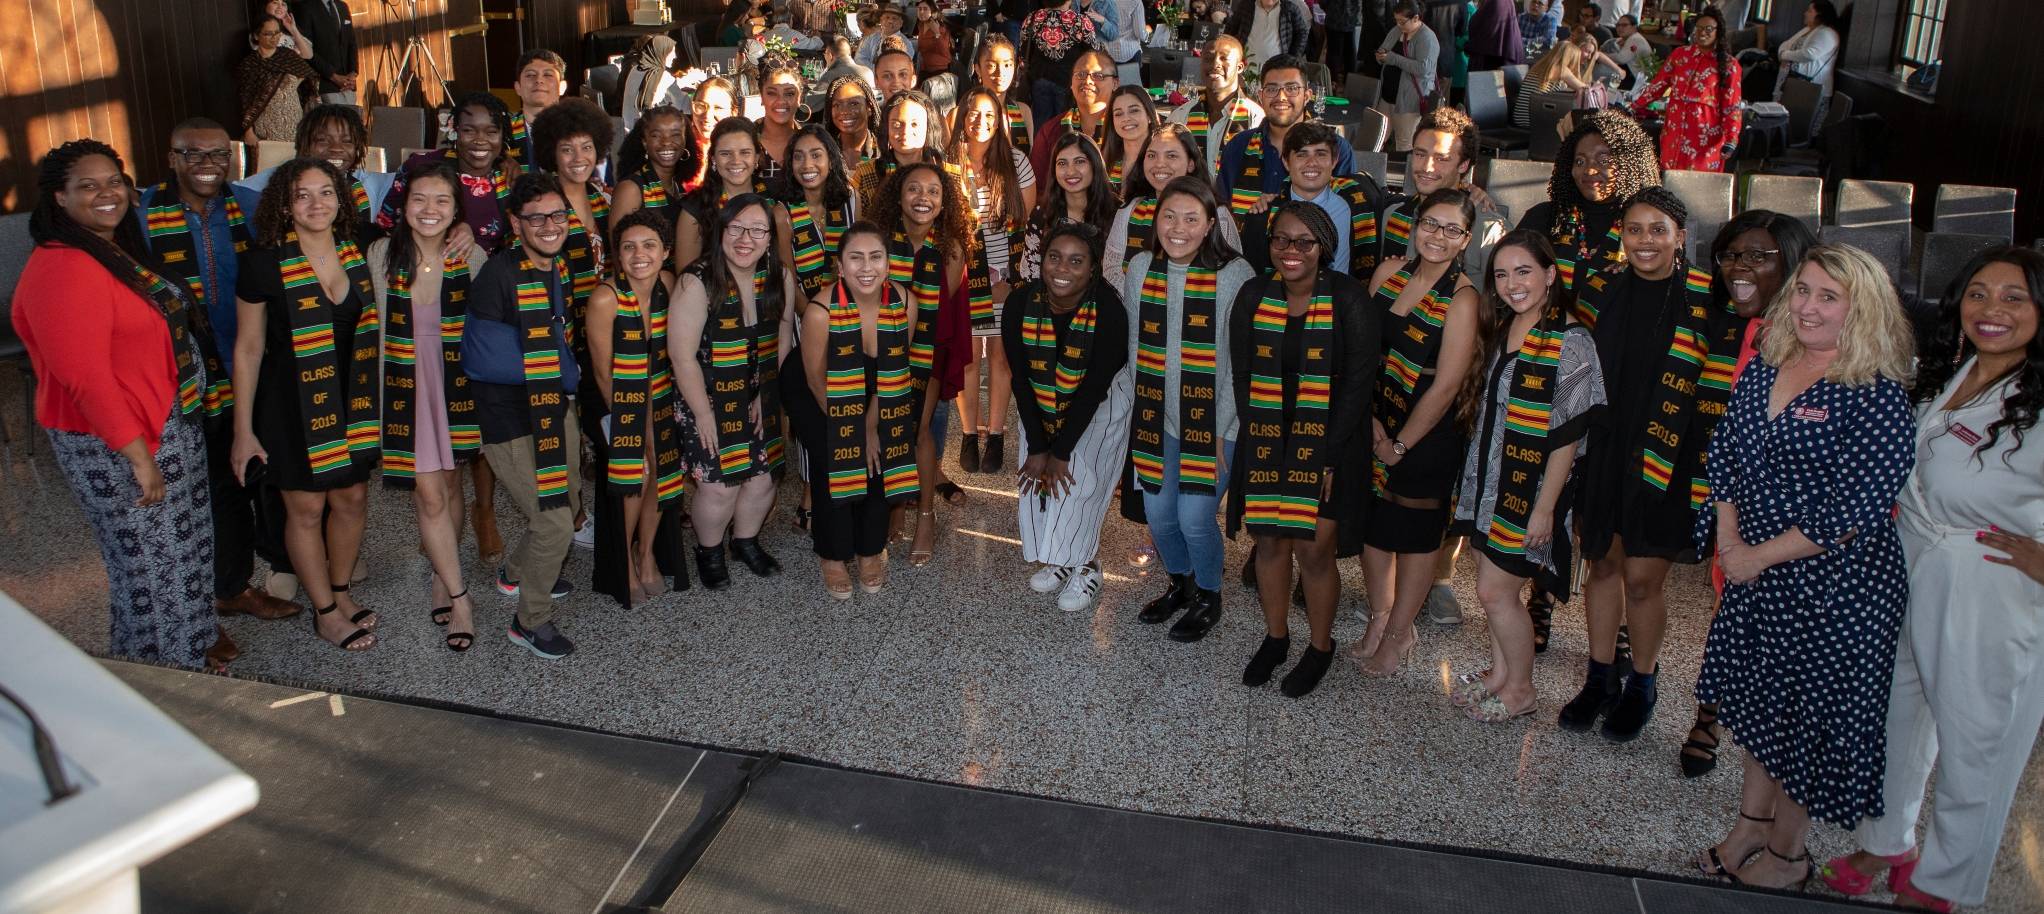 2019 senior class gathers with kente cloth stoles adorned